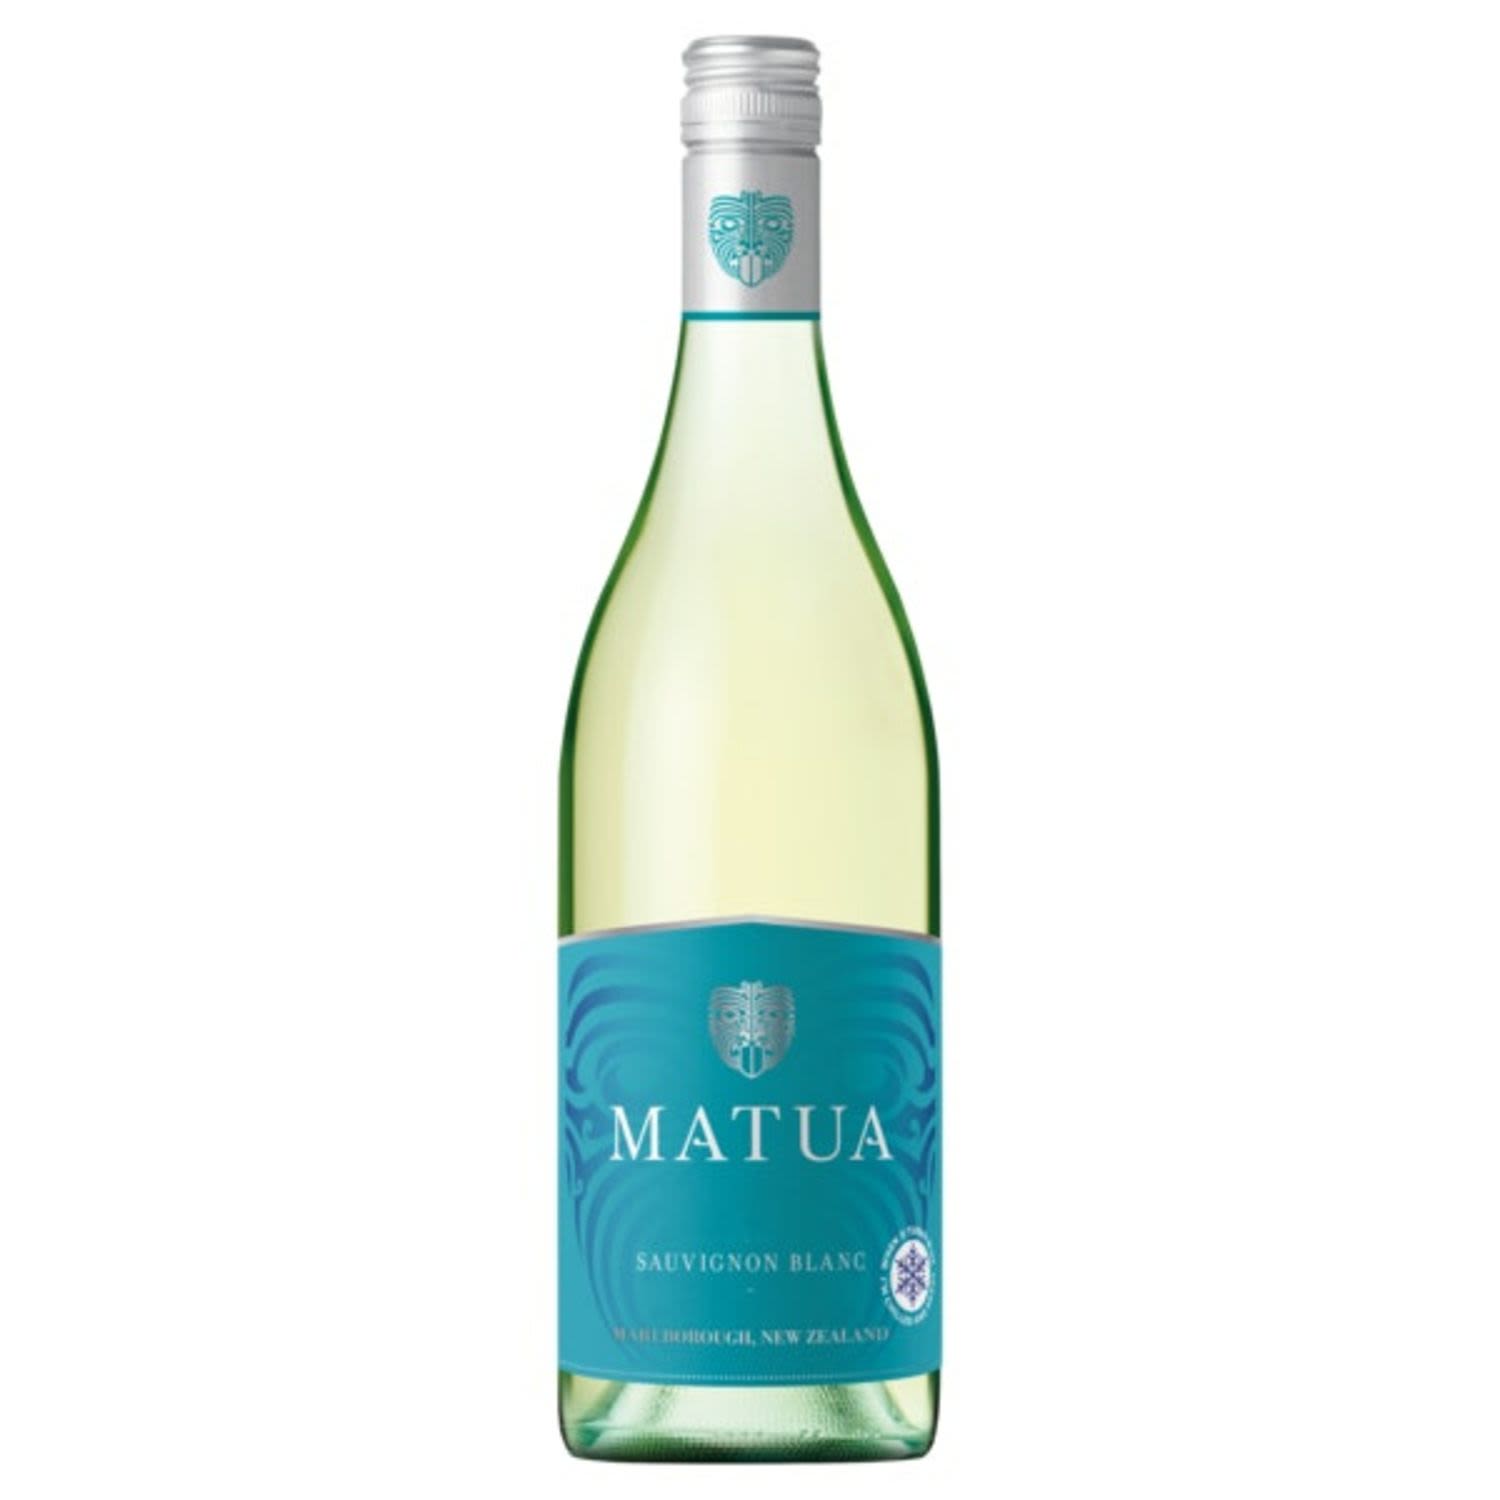 Enticing lifted aromas of tropical fruits melded with hints of citrus & fresh cut grass. The palate is light and refreshing with a wonderful clean crisp finish that runs on and on. *At least 25% lighter in alcohol & 25% less in calories.<br /> <br />Alcohol Volume: 9.00%<br /><br />Pack Format: 6 Pack<br /><br />Standard Drinks: 5.3</br /><br />Pack Type: Bottle<br /><br />Country of Origin: New Zealand<br /><br />Region: Marlborough<br /><br />Vintage: Vintages Vary<br />